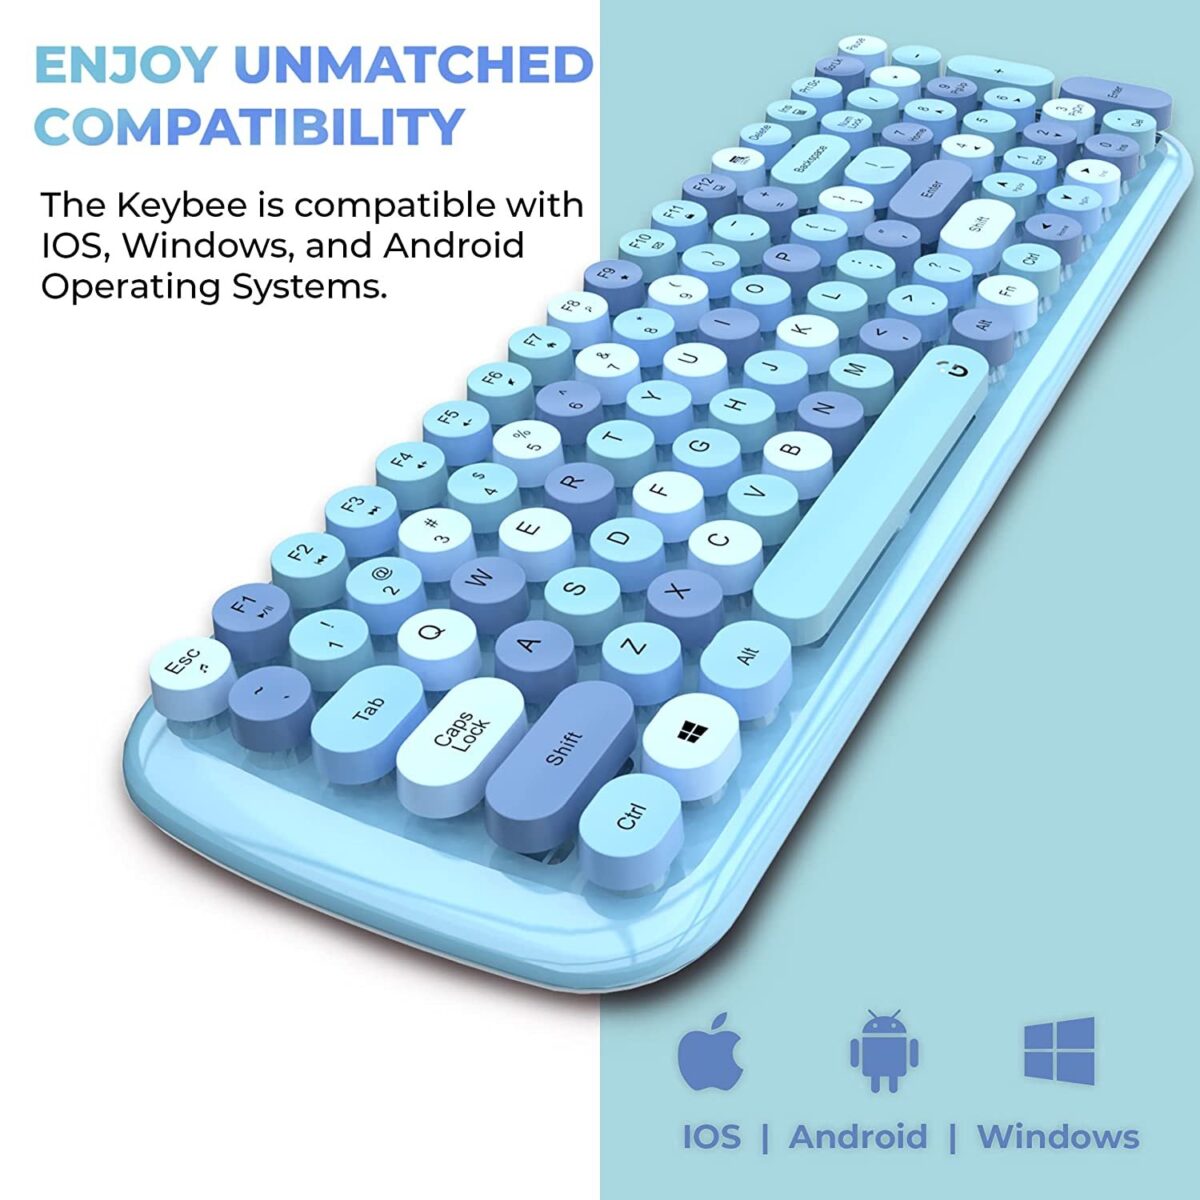 I gear keybee retro typewriter inspired 2. 4ghz wireless keyboard and mouse combo 2 wireless keyboard and mouse